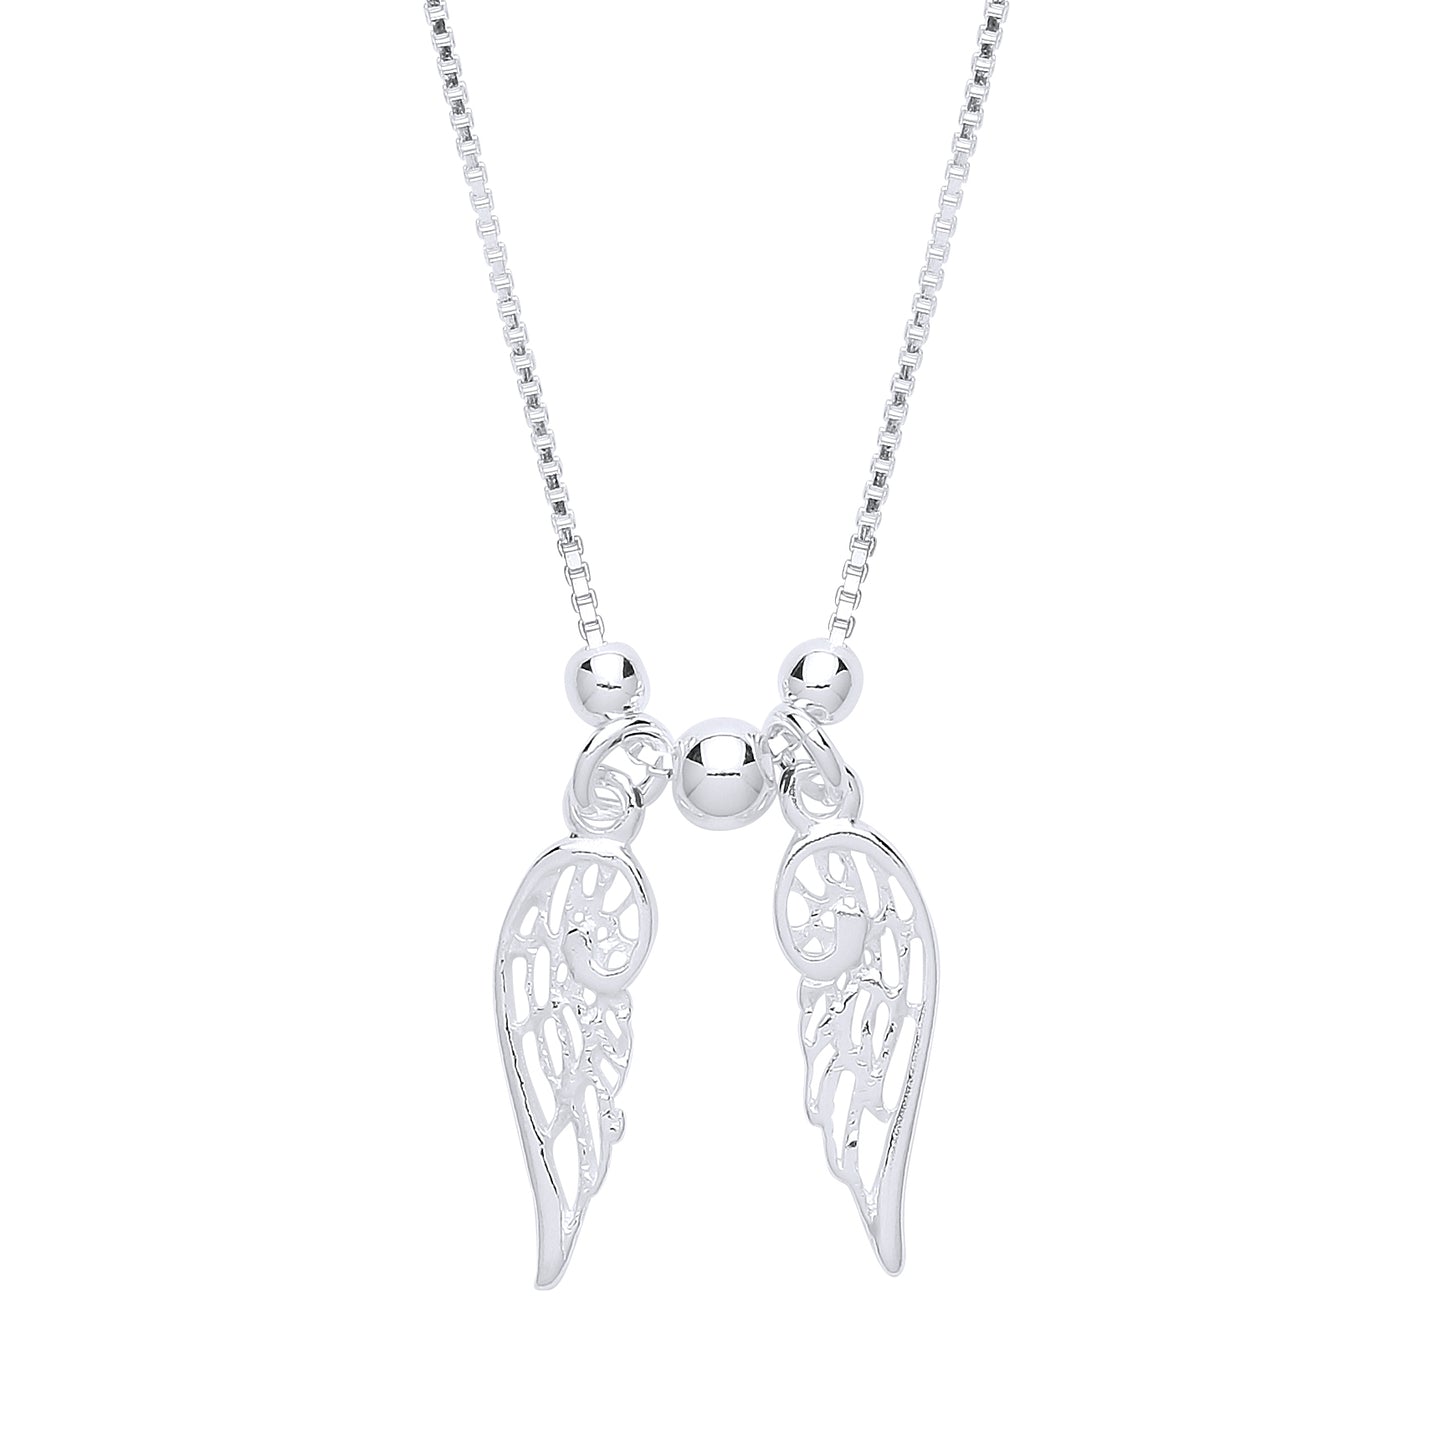 Silver  Angel Wings Charm Necklace 16 inch - GVK291